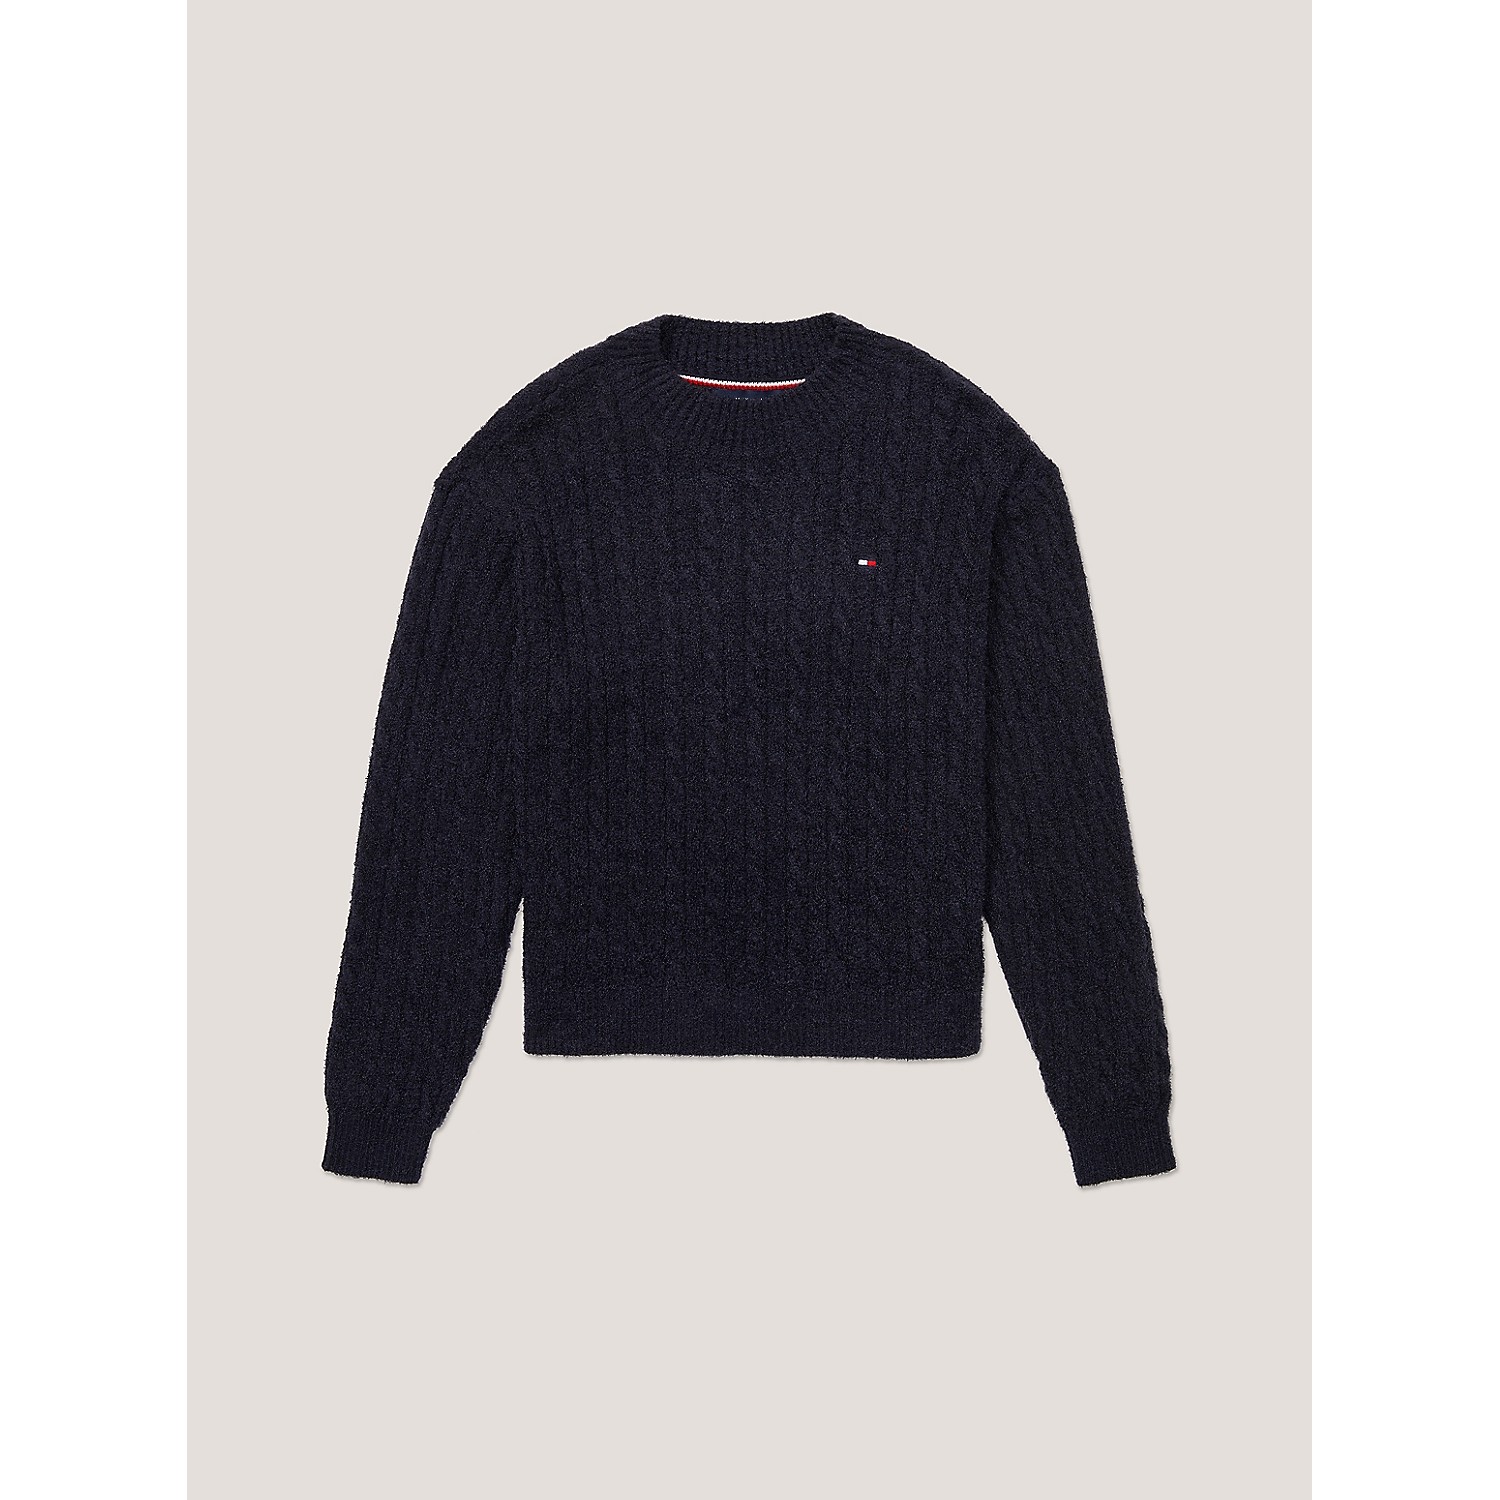 TOMMY HILFIGER Kids Cable Sweater